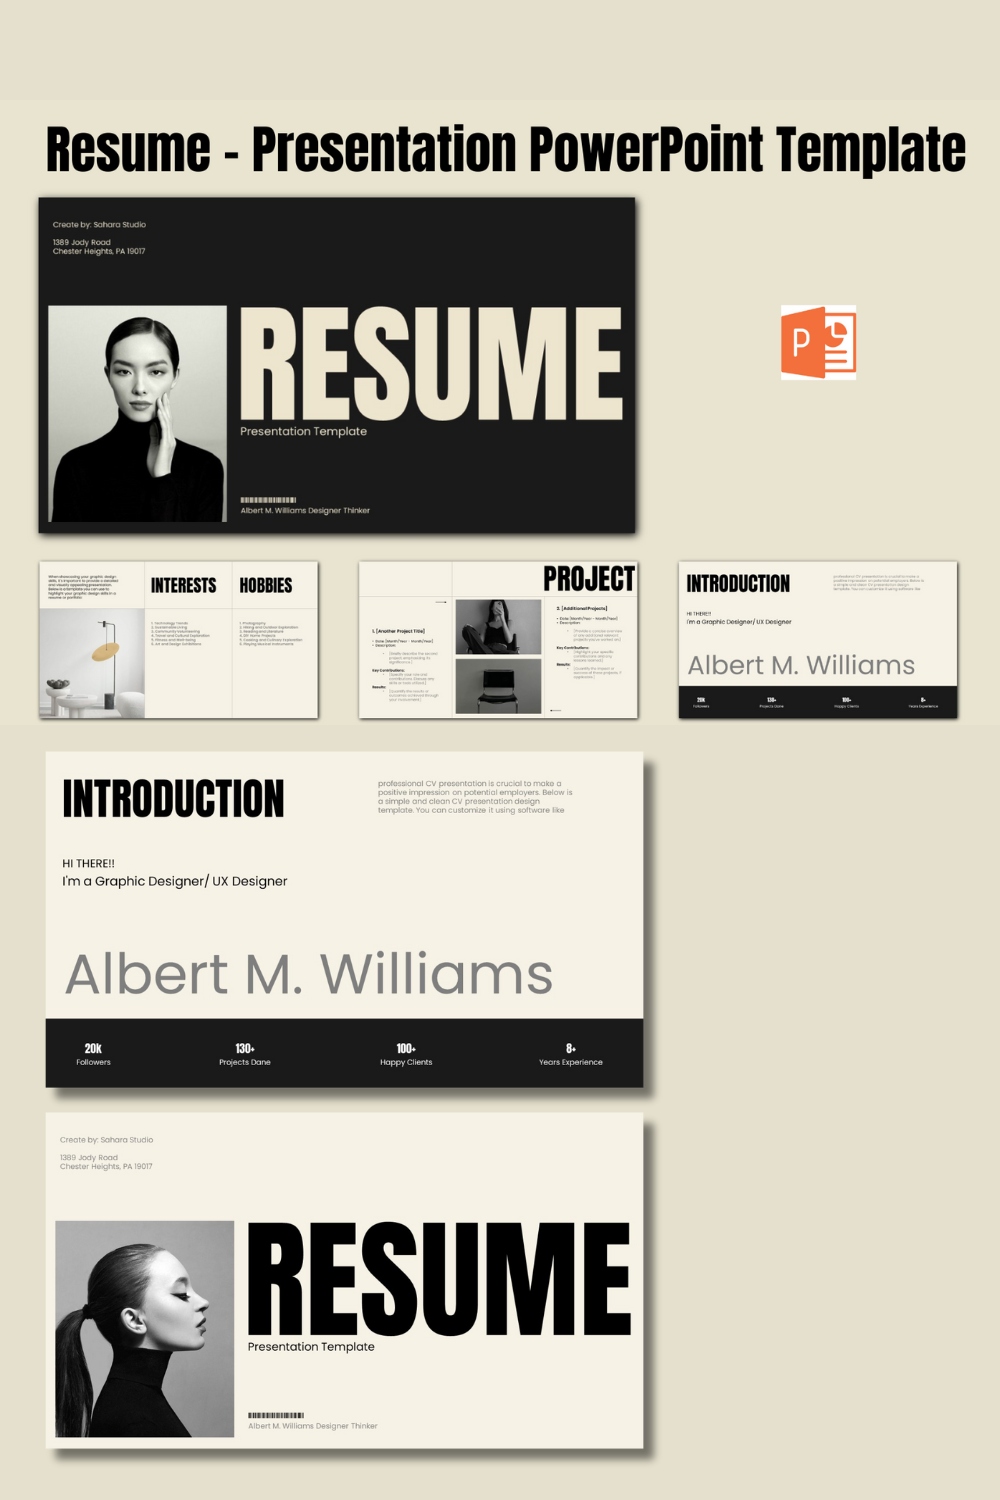 Resume - Presentation PowerPoint Template pinterest preview image.